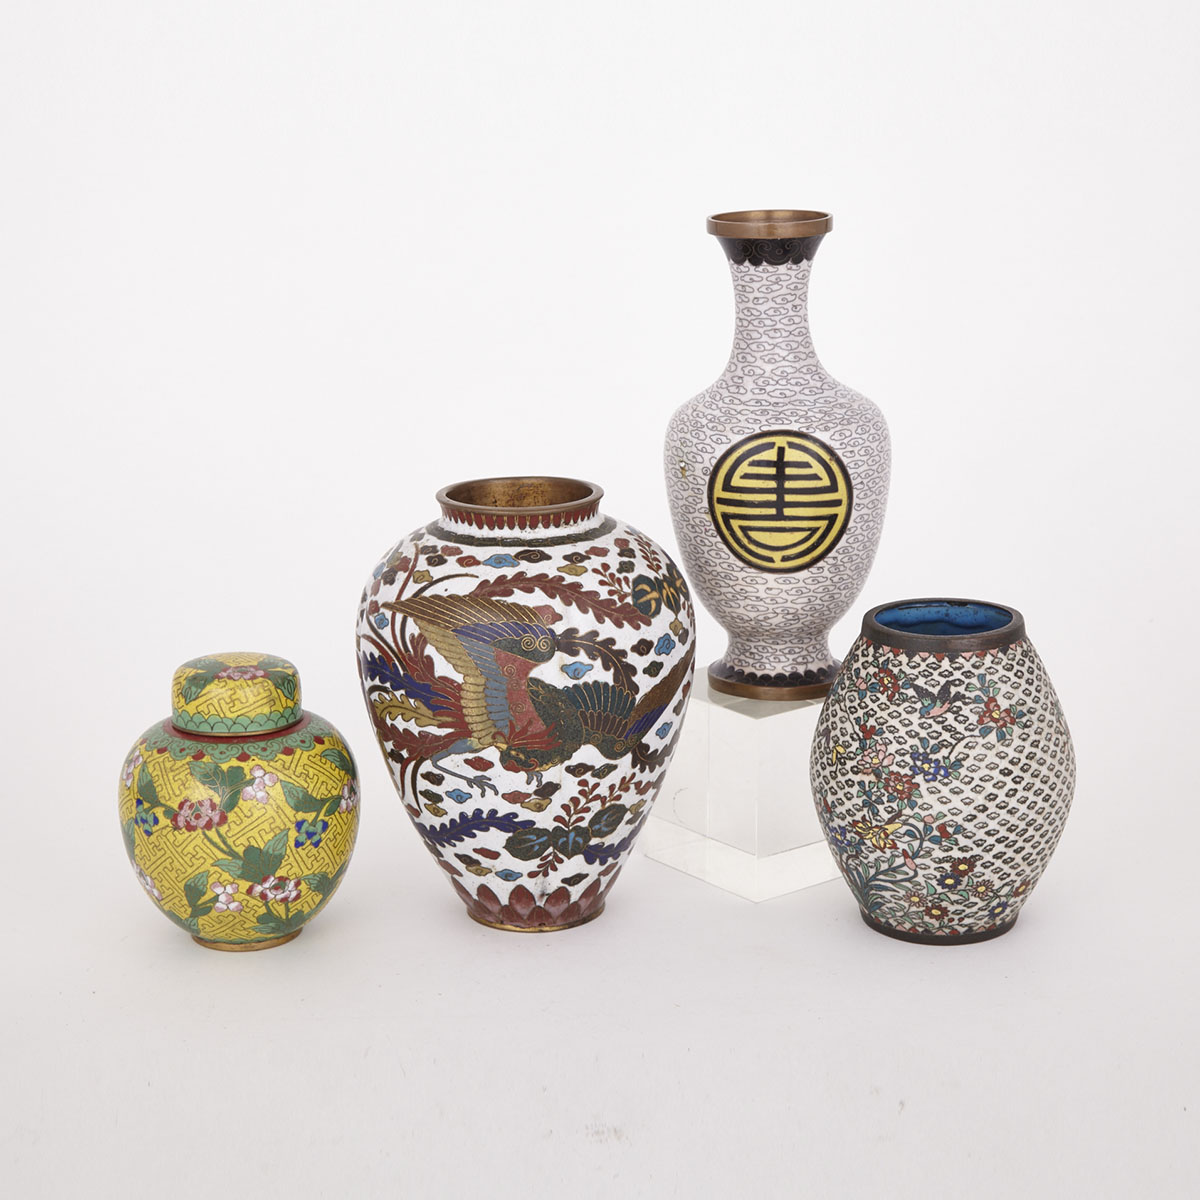 Four Cloisonne Vessels, early 20th Century